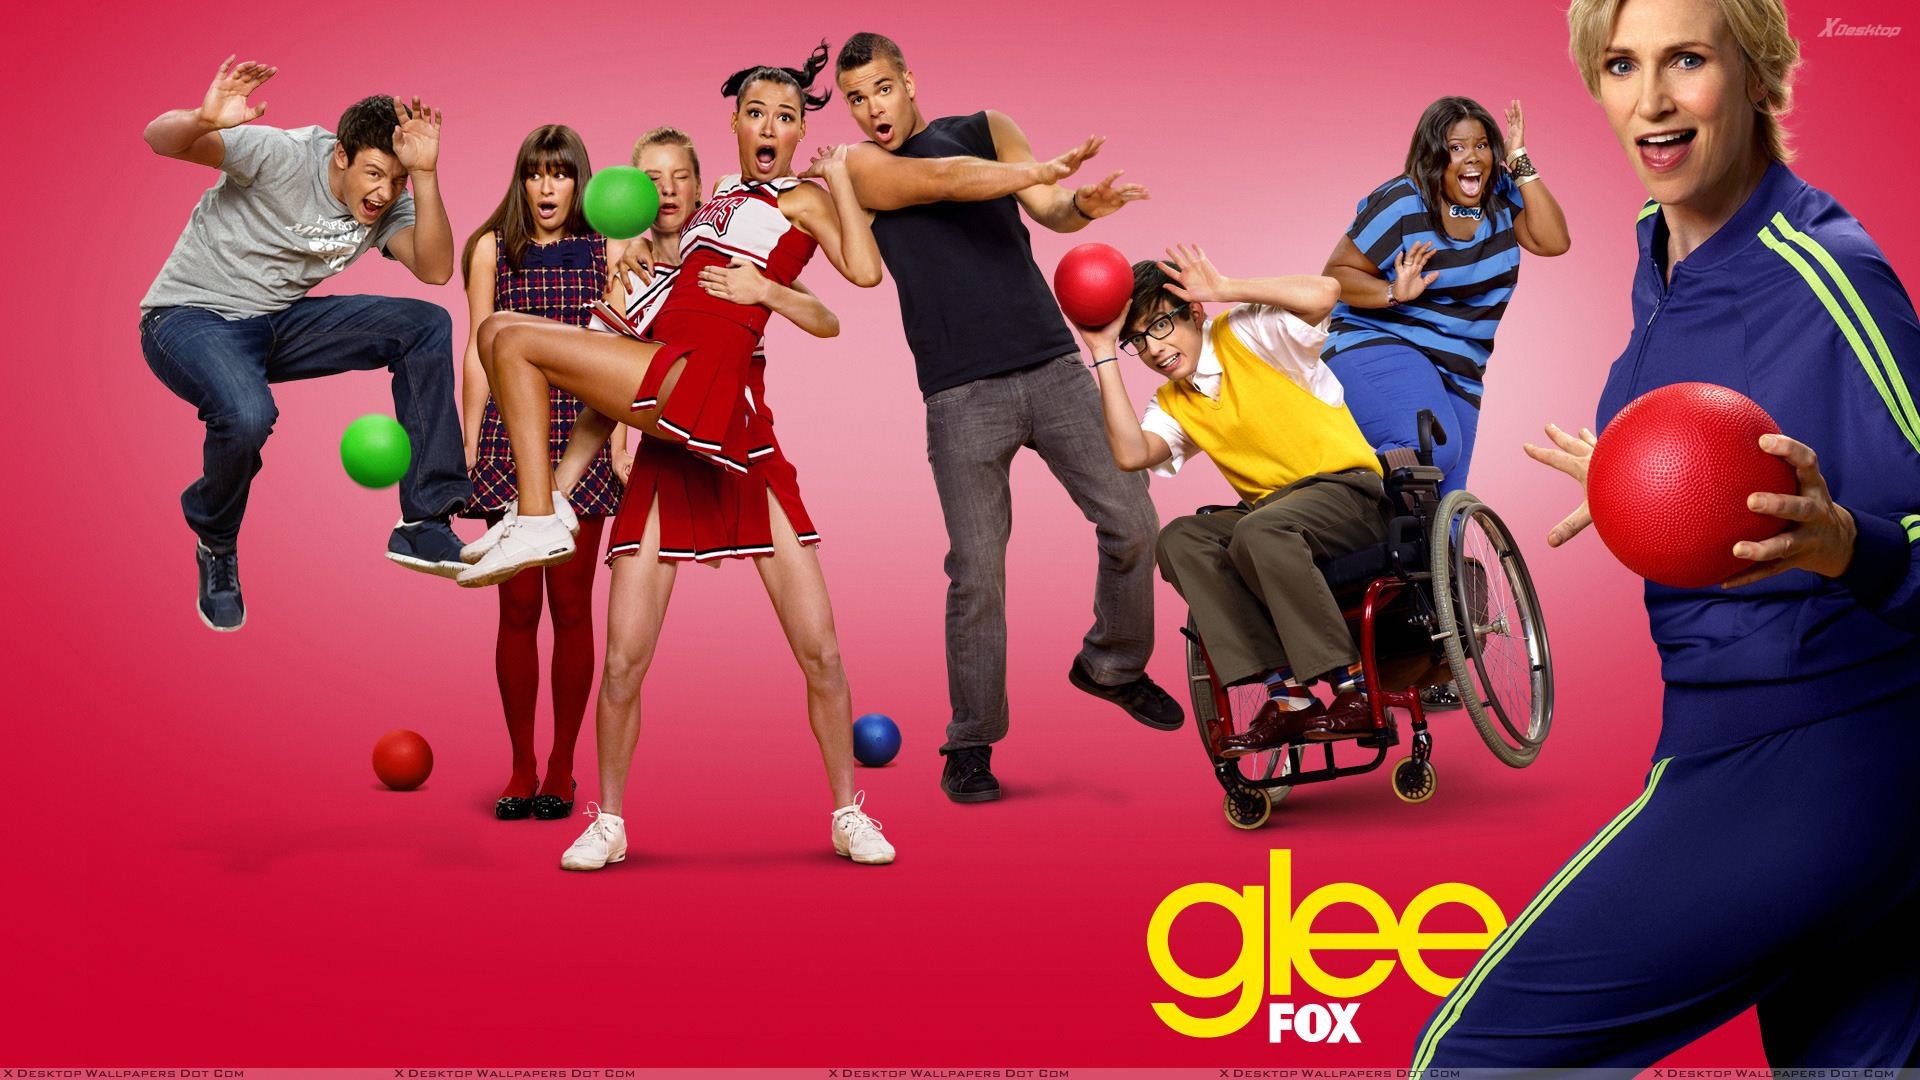 1920x1080 You are viewing wallpaper titled "Glee ...